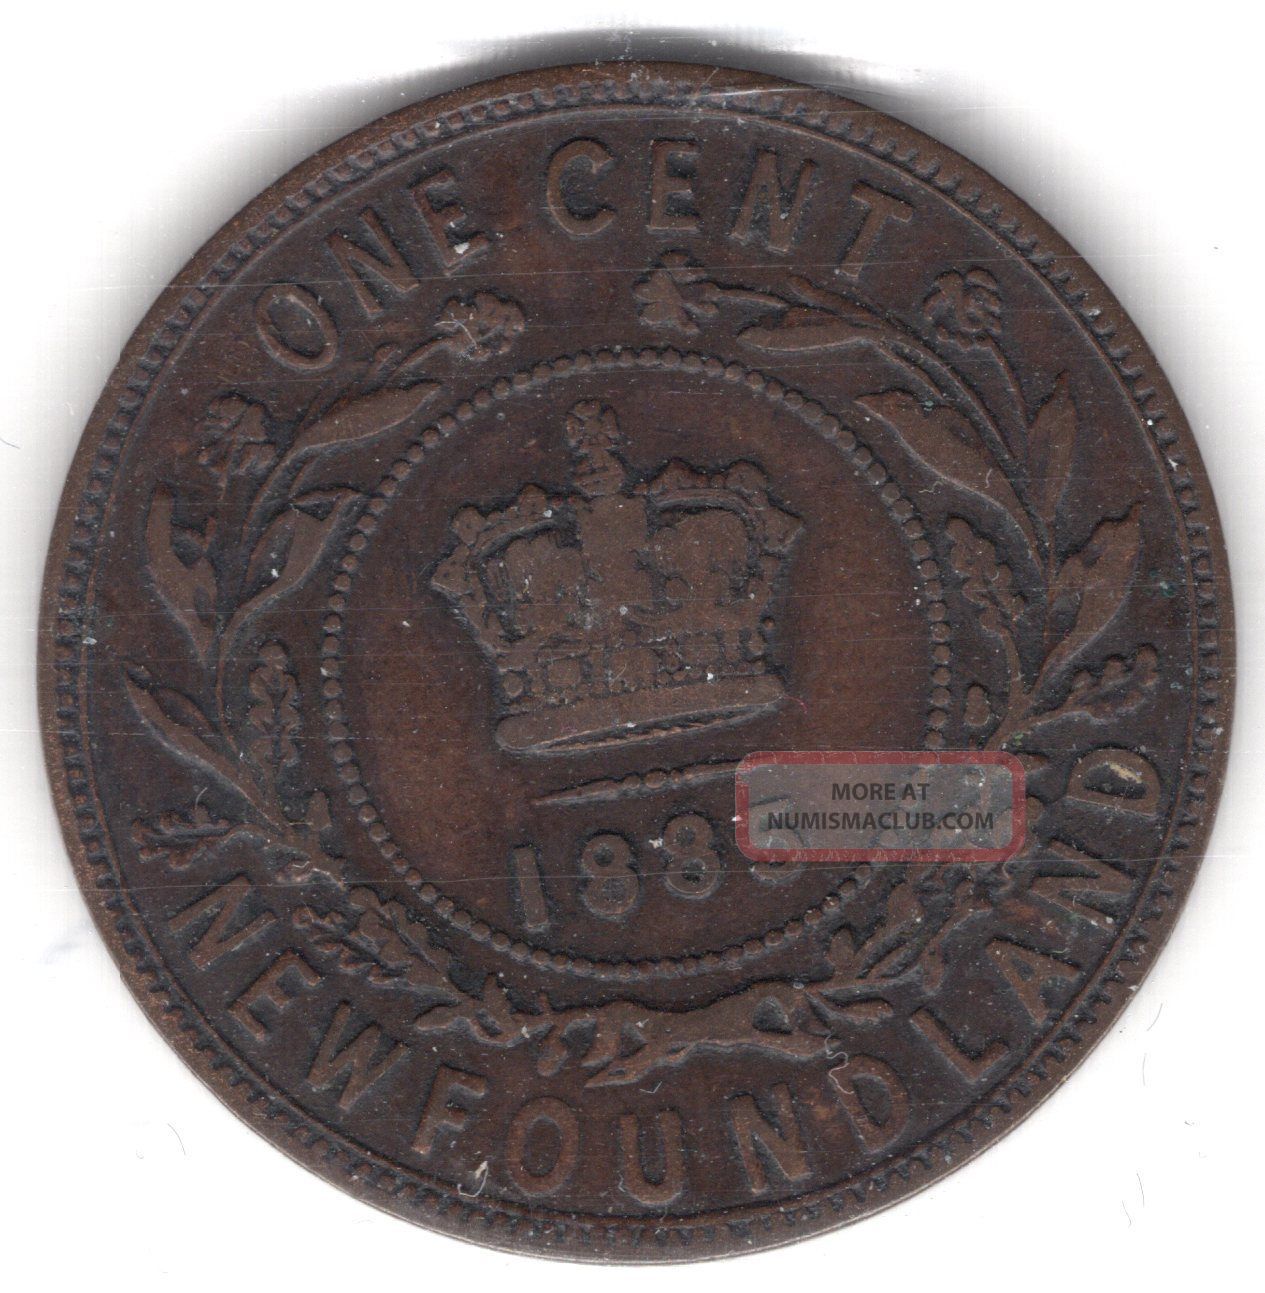 1885 Newfoundland Canada One 1 Cent Copper Penny Issc Graded Coin A291 Coins: Canada photo